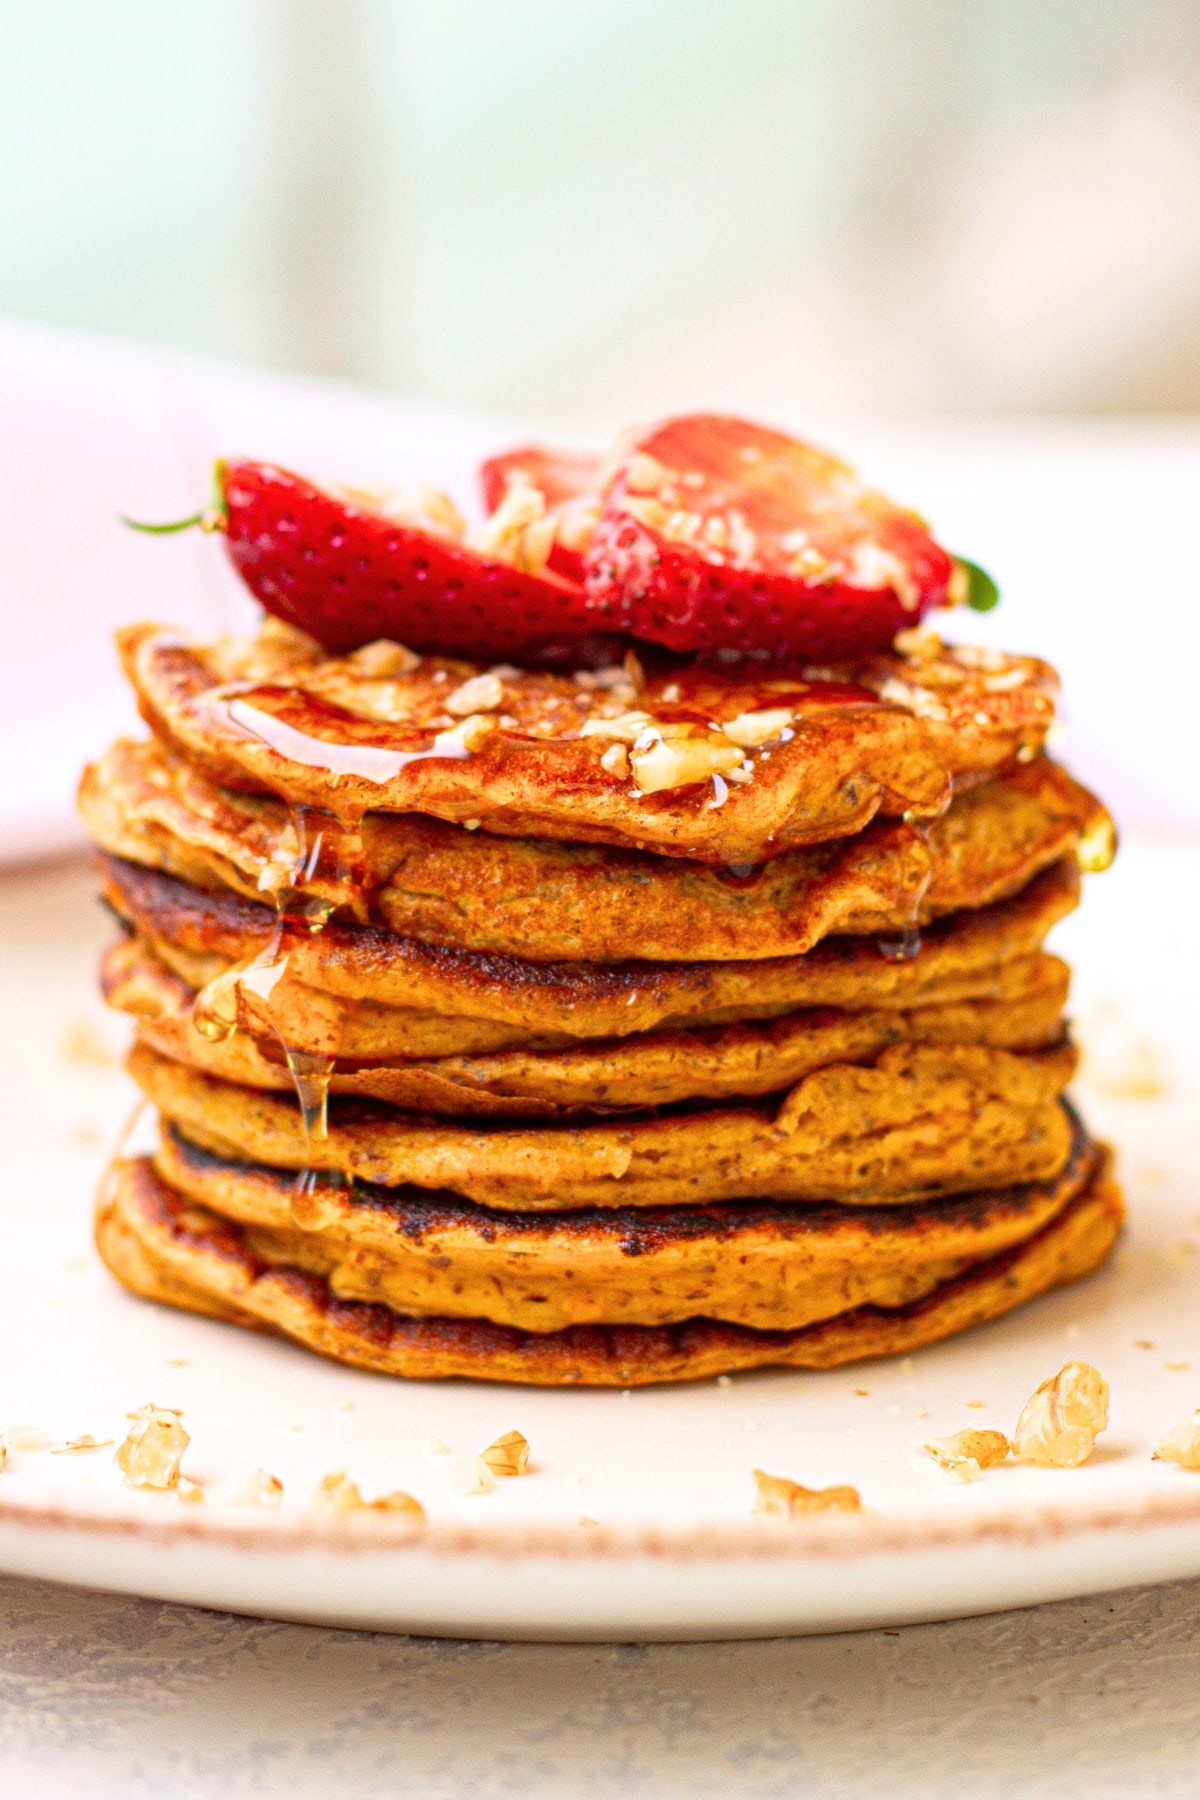 A stack of gluten-free sweet potato pancakes topped with strawberries.